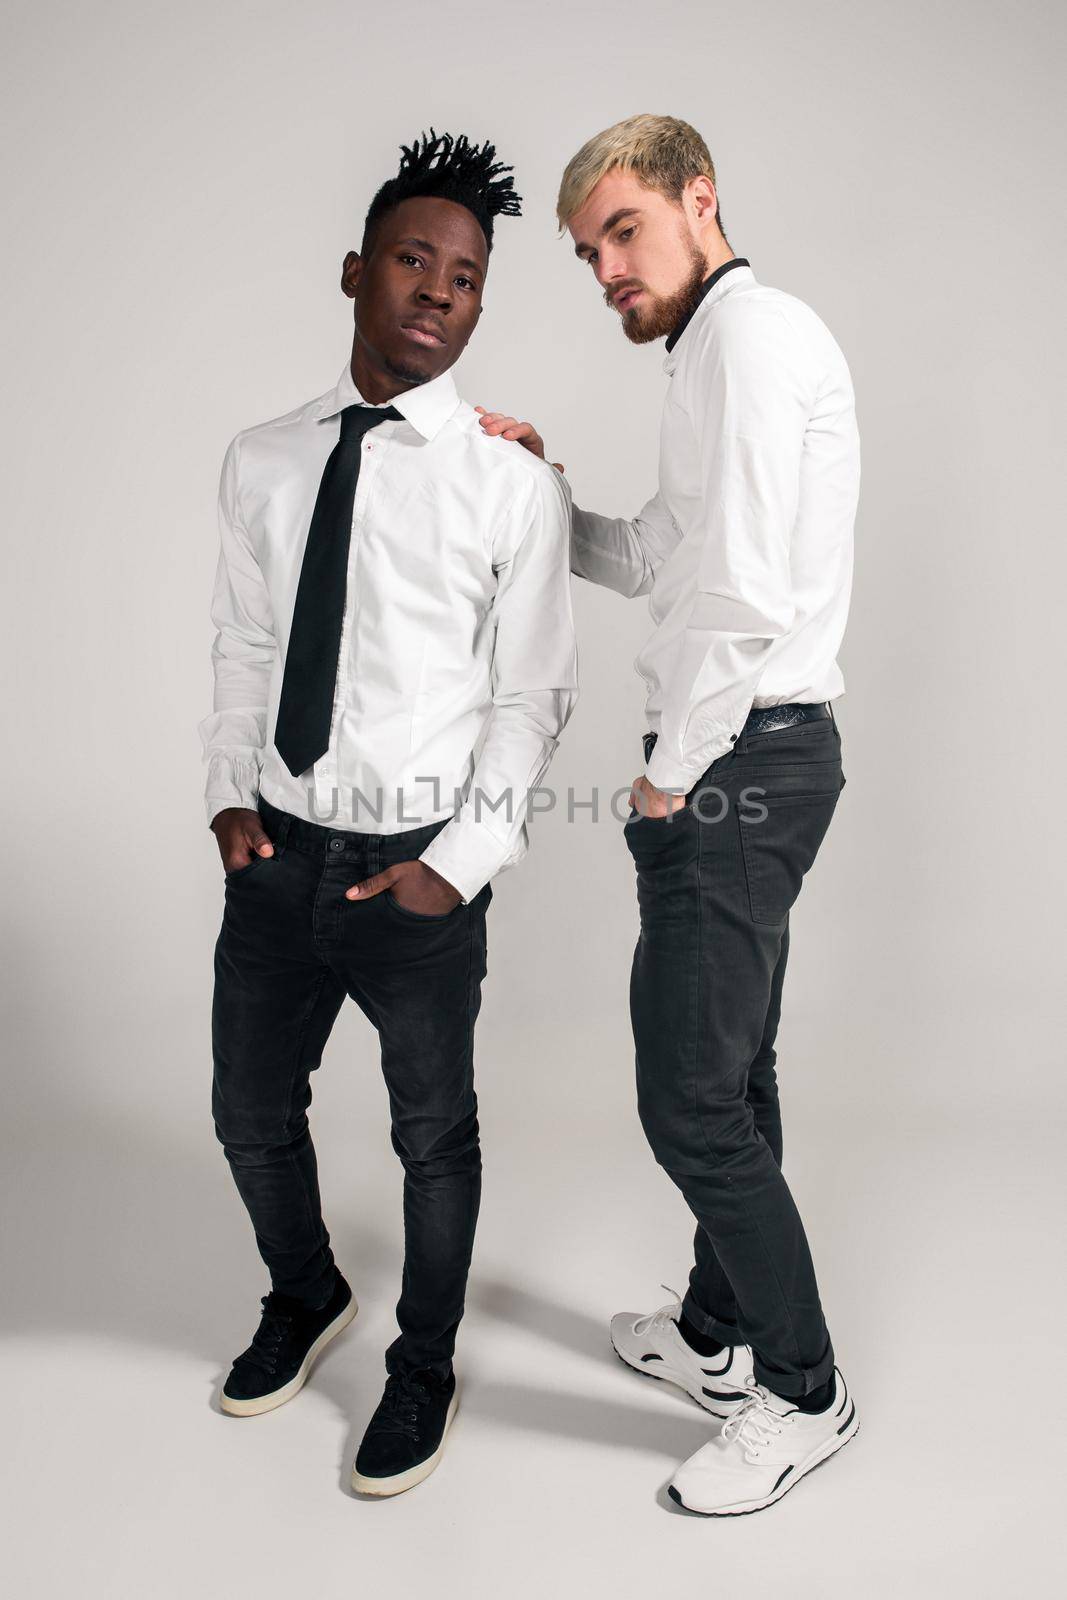 Joyful relaxed african and caucasian boys in white and black office clothes laughing and posing at white studio background with copy space. Full-length photo